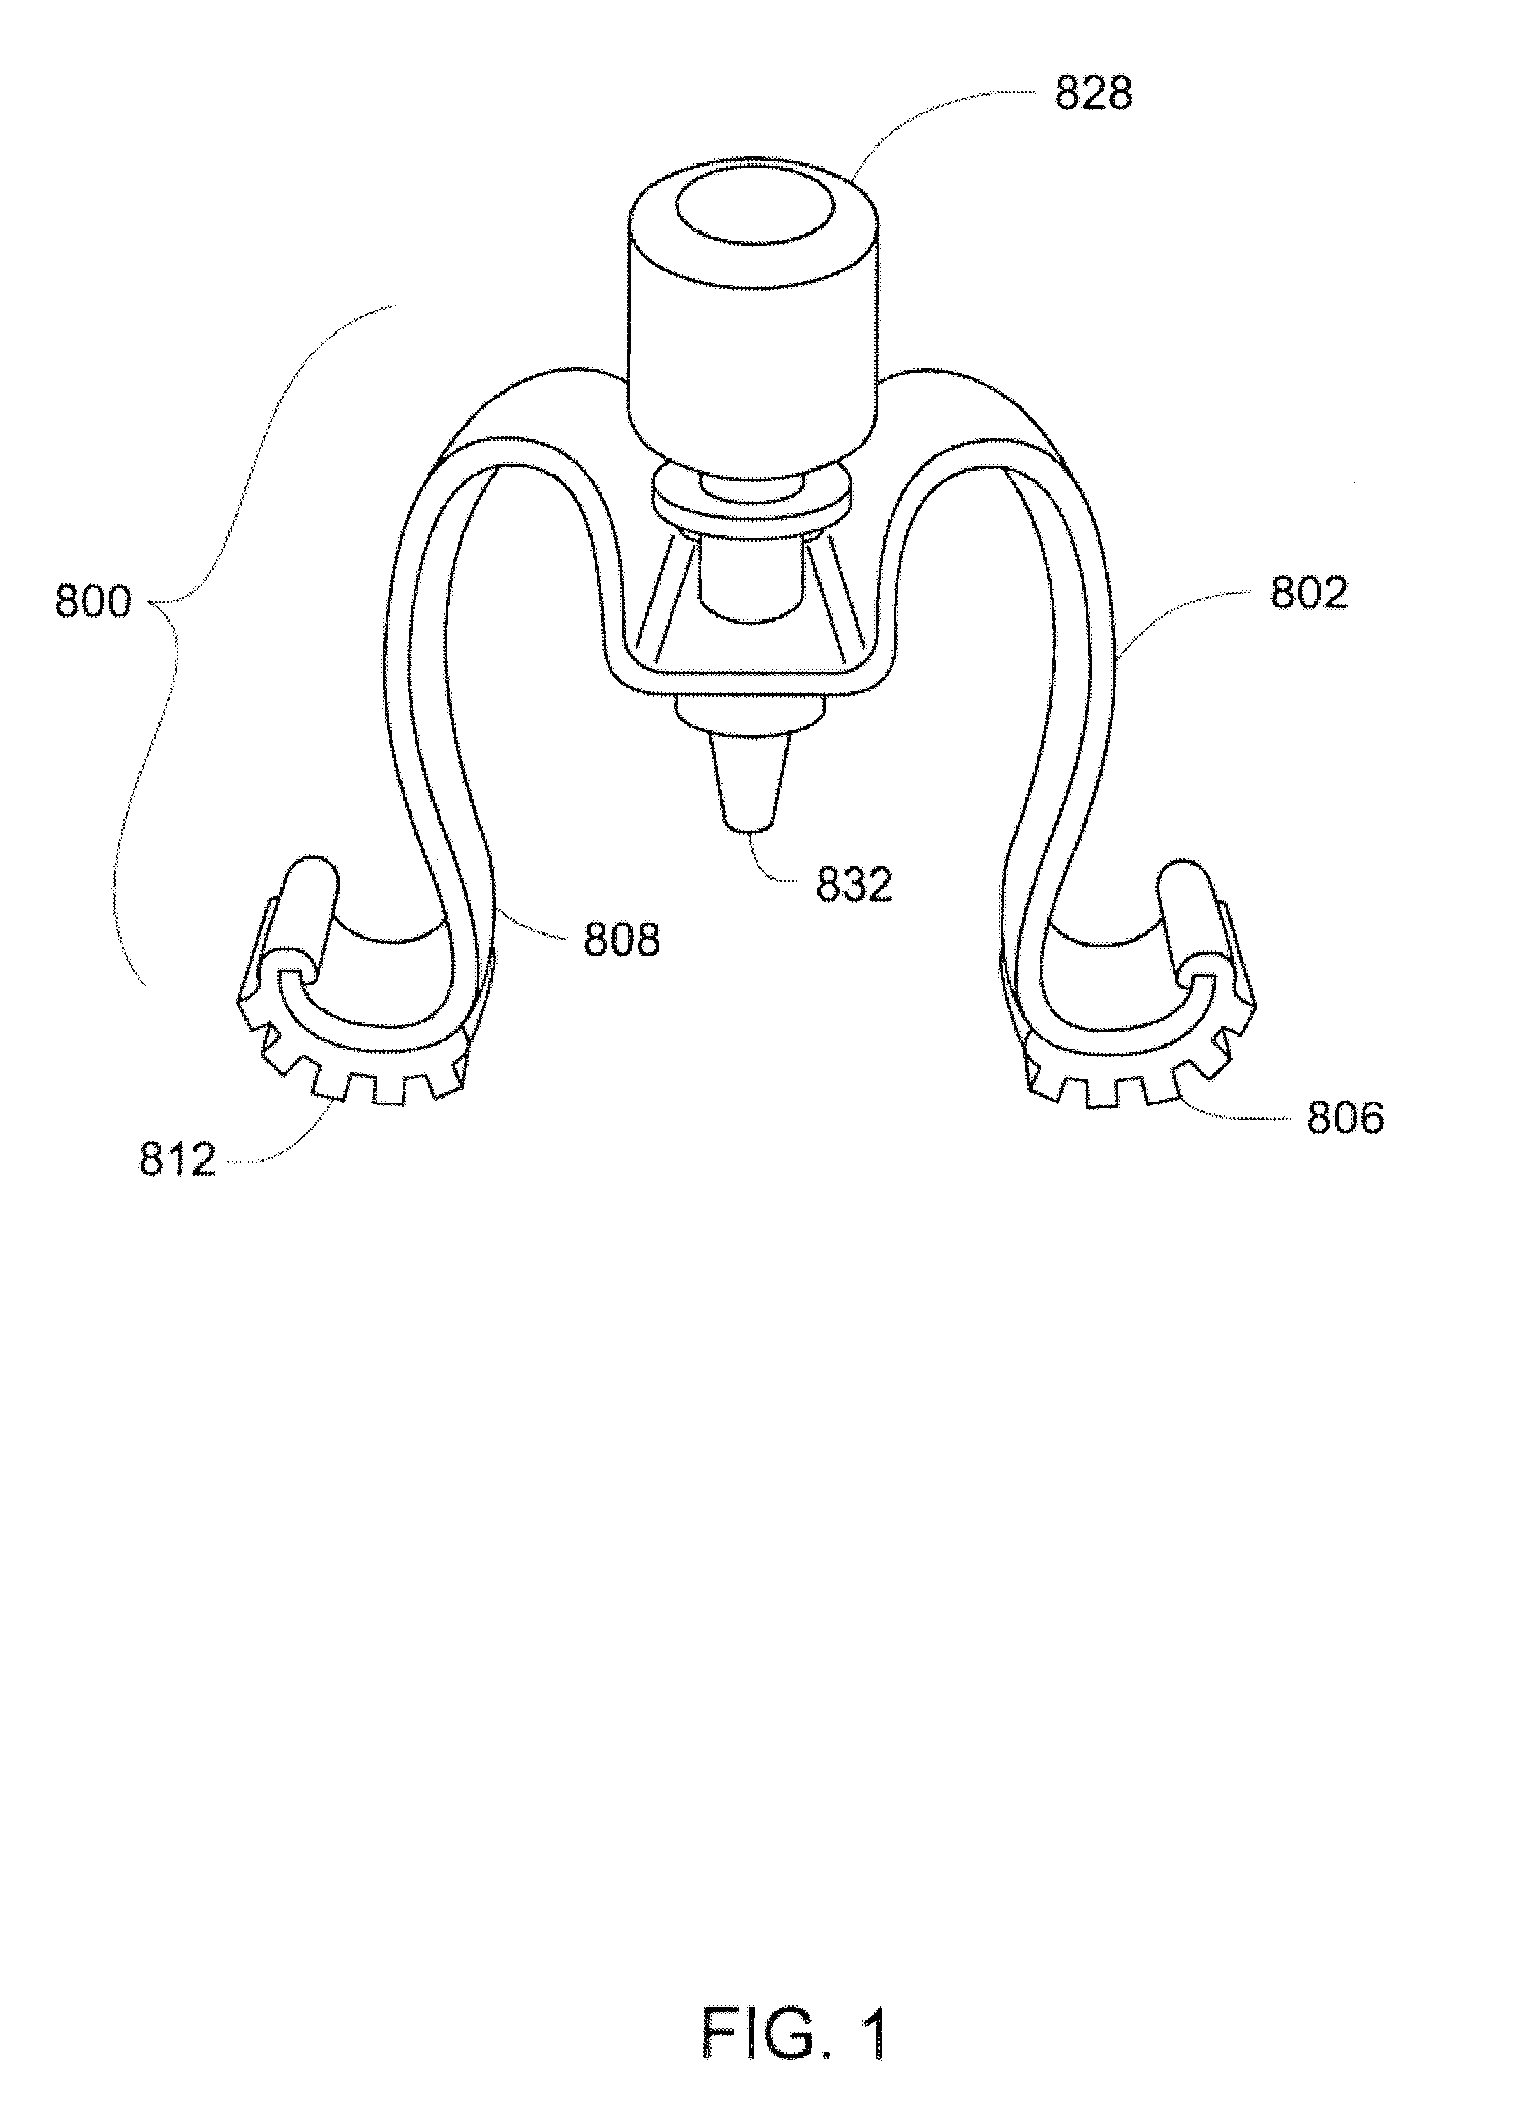 Automated Eyedrop Delivery System with Eyelid Retracting Legs